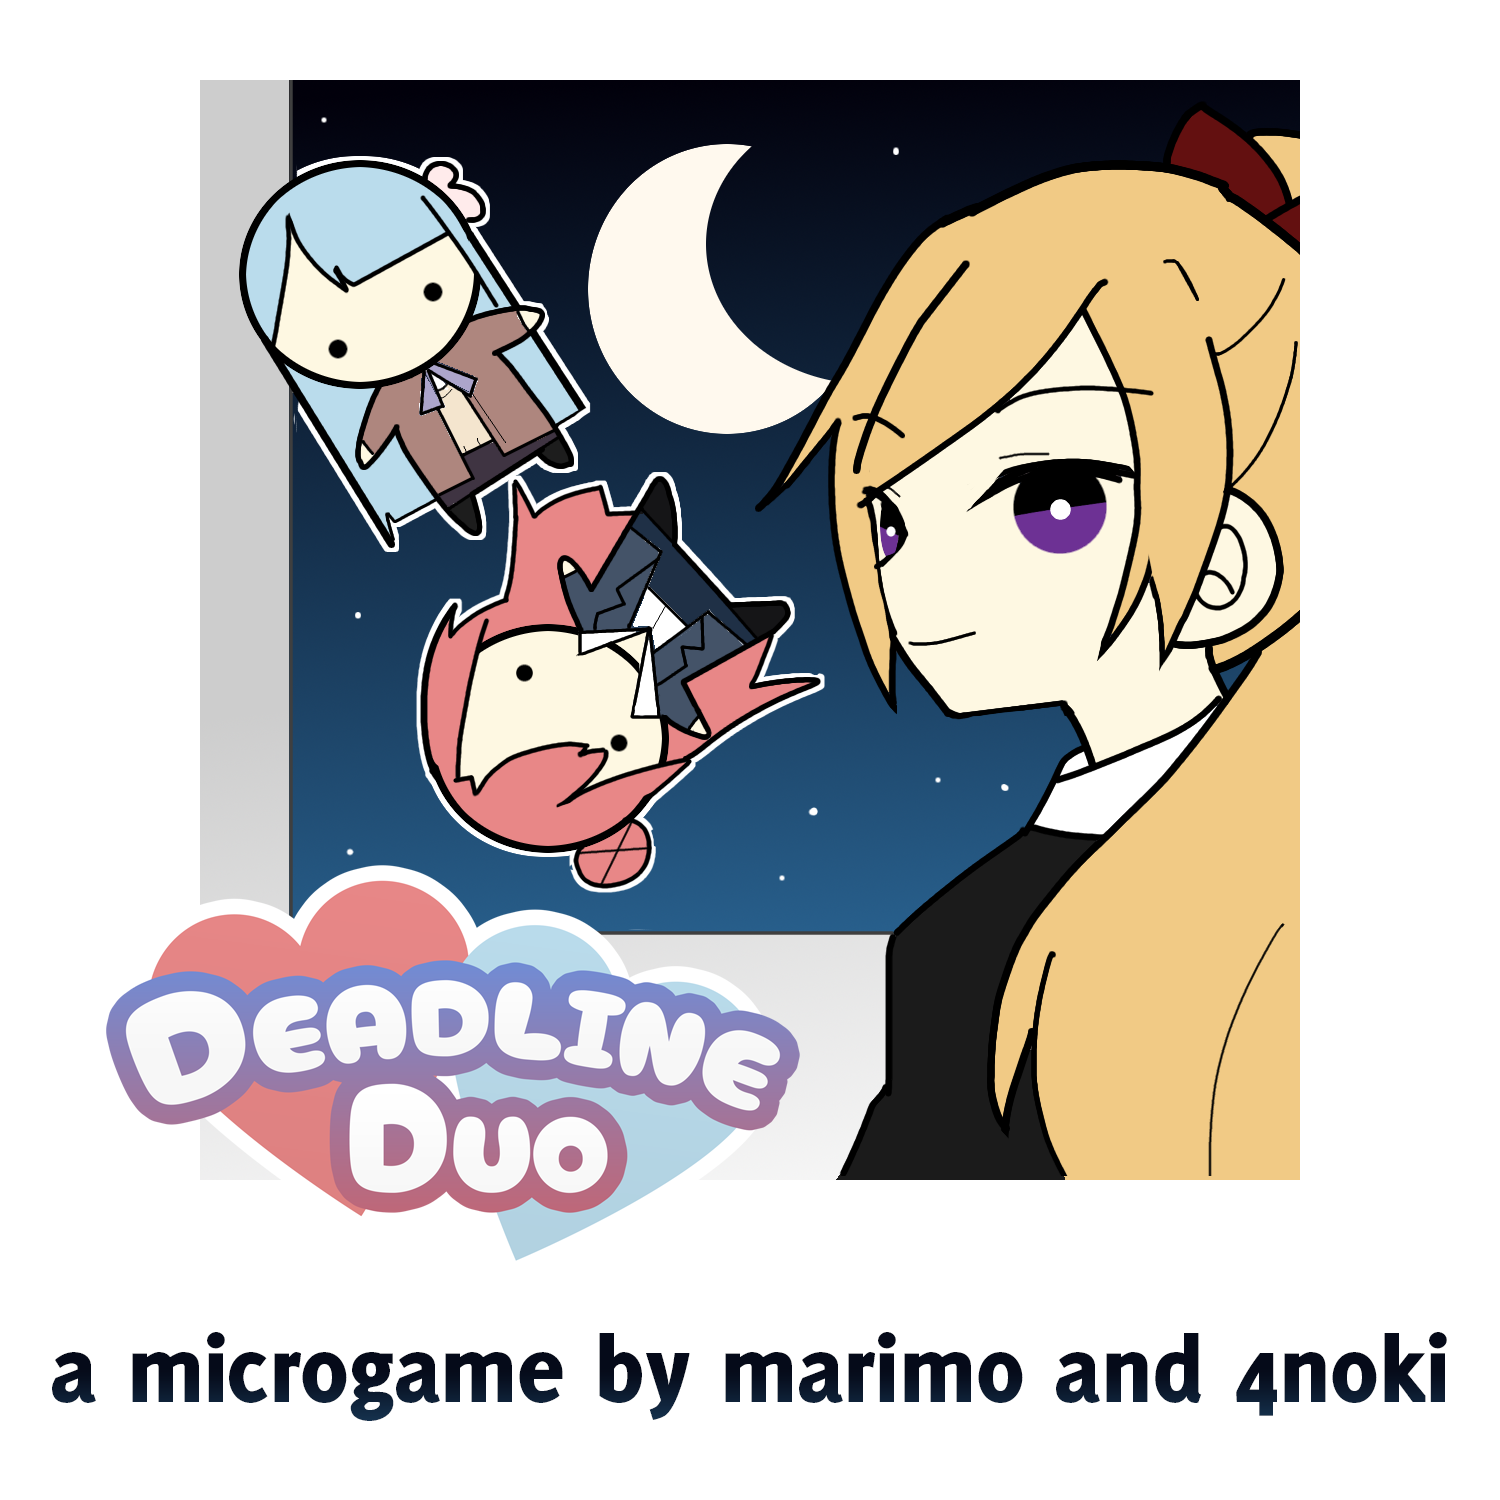 Deadline Duo: a microgame by marimo and 4noki